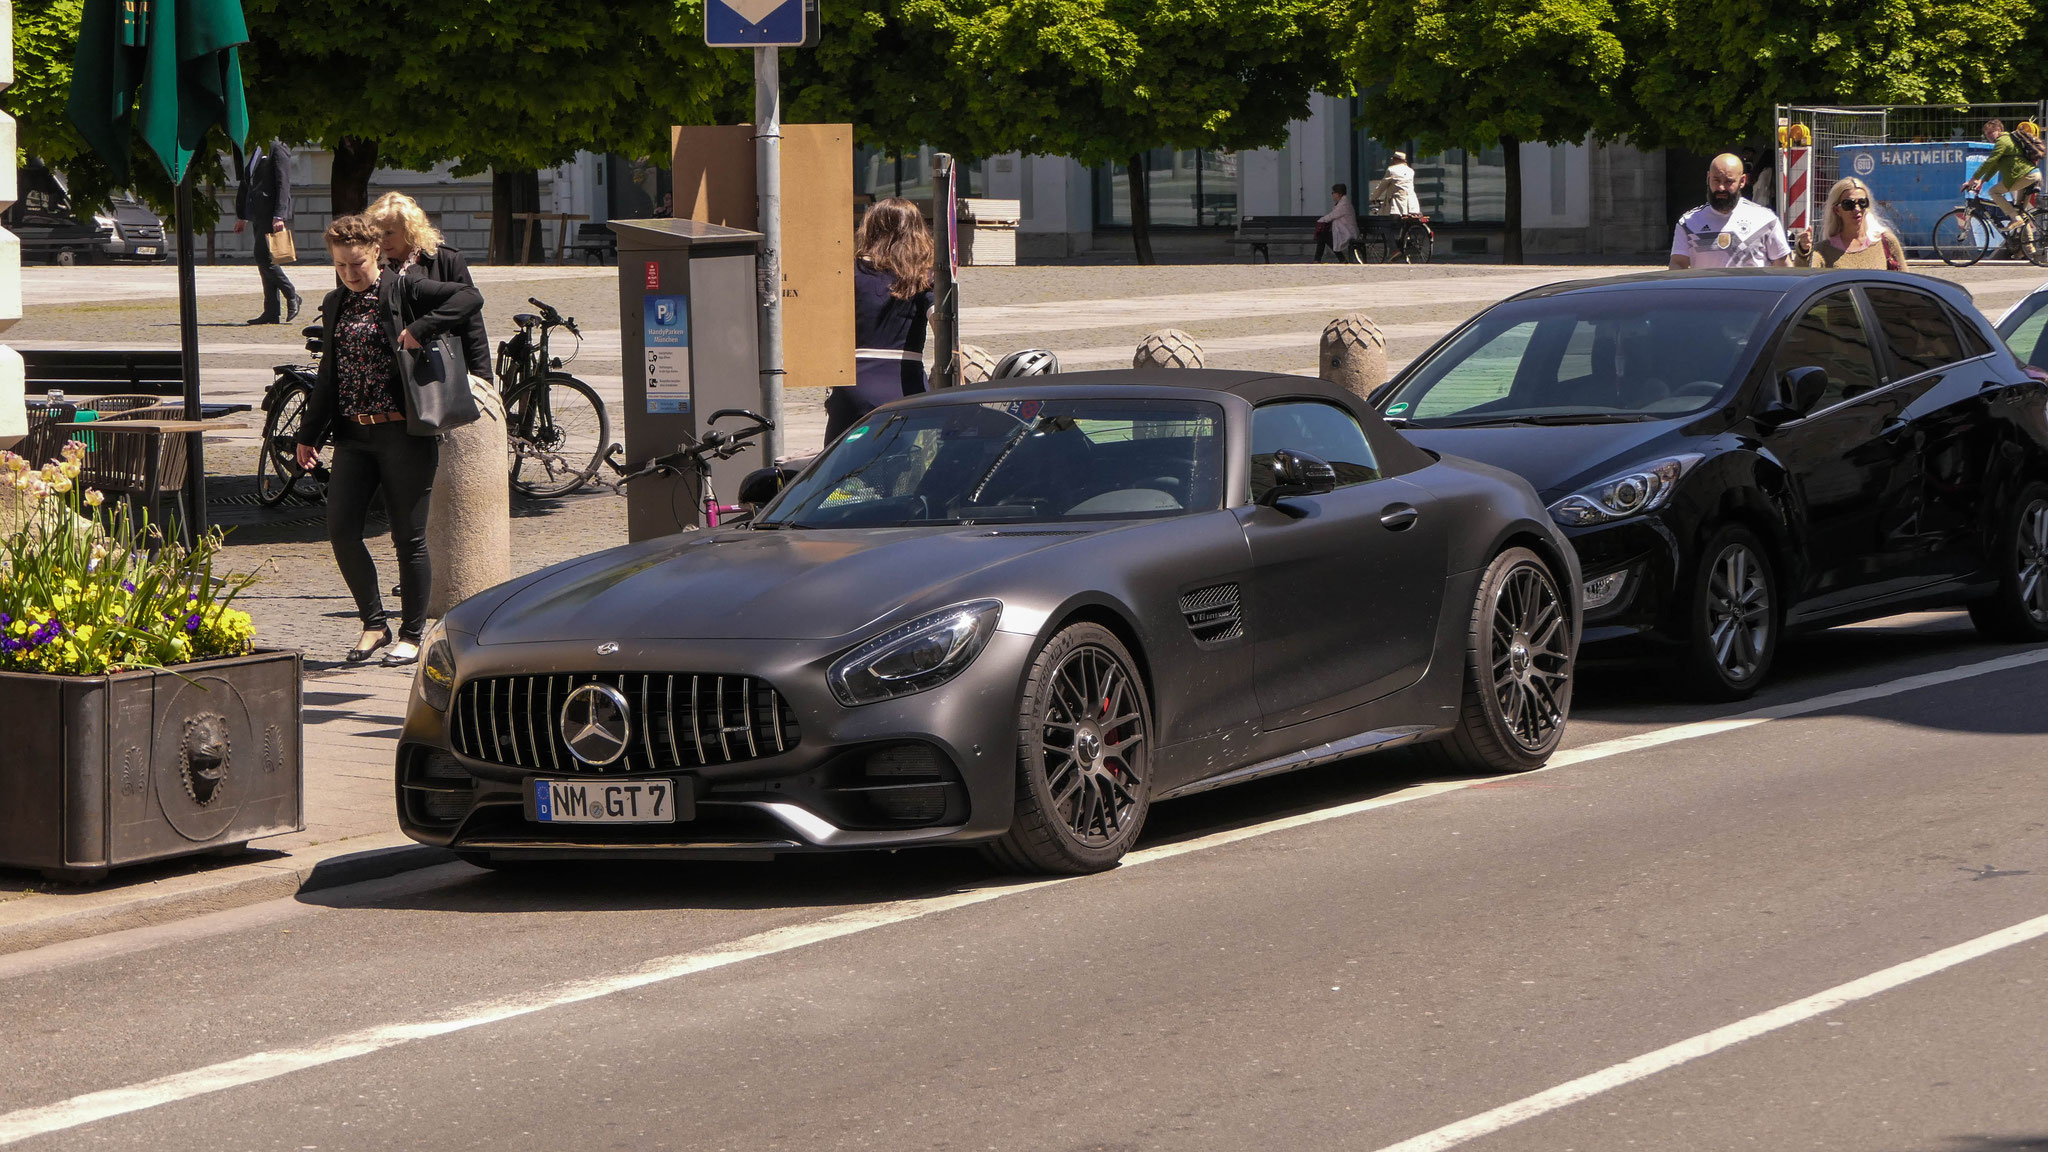 AMG GTC 50 Edition Roadster - NM-GT-7